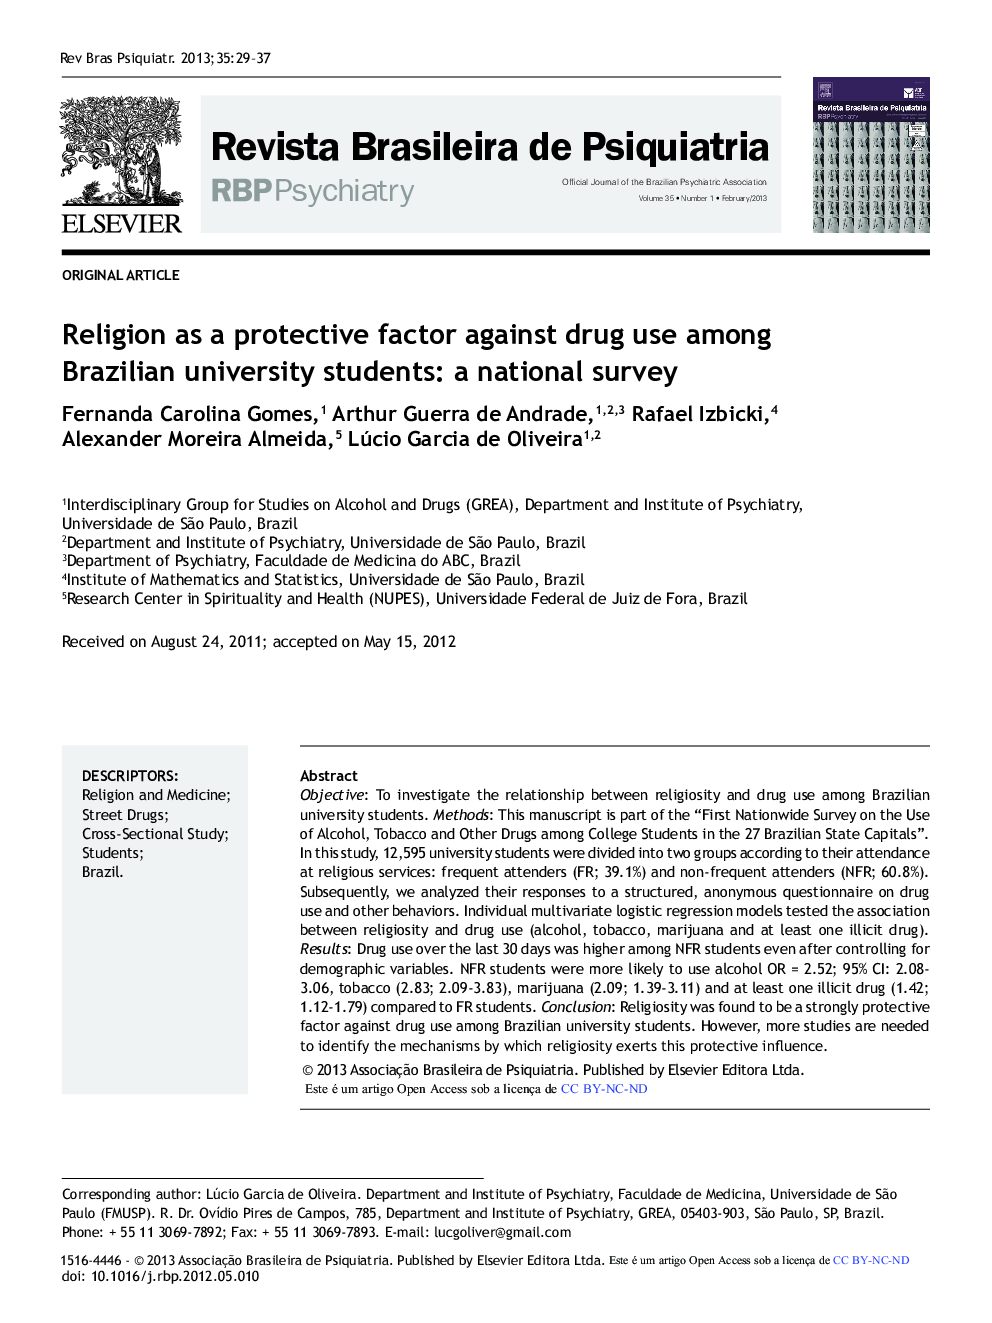 Religion as a Protective Factor against Drug Use among Brazilian University Students: A National Survey